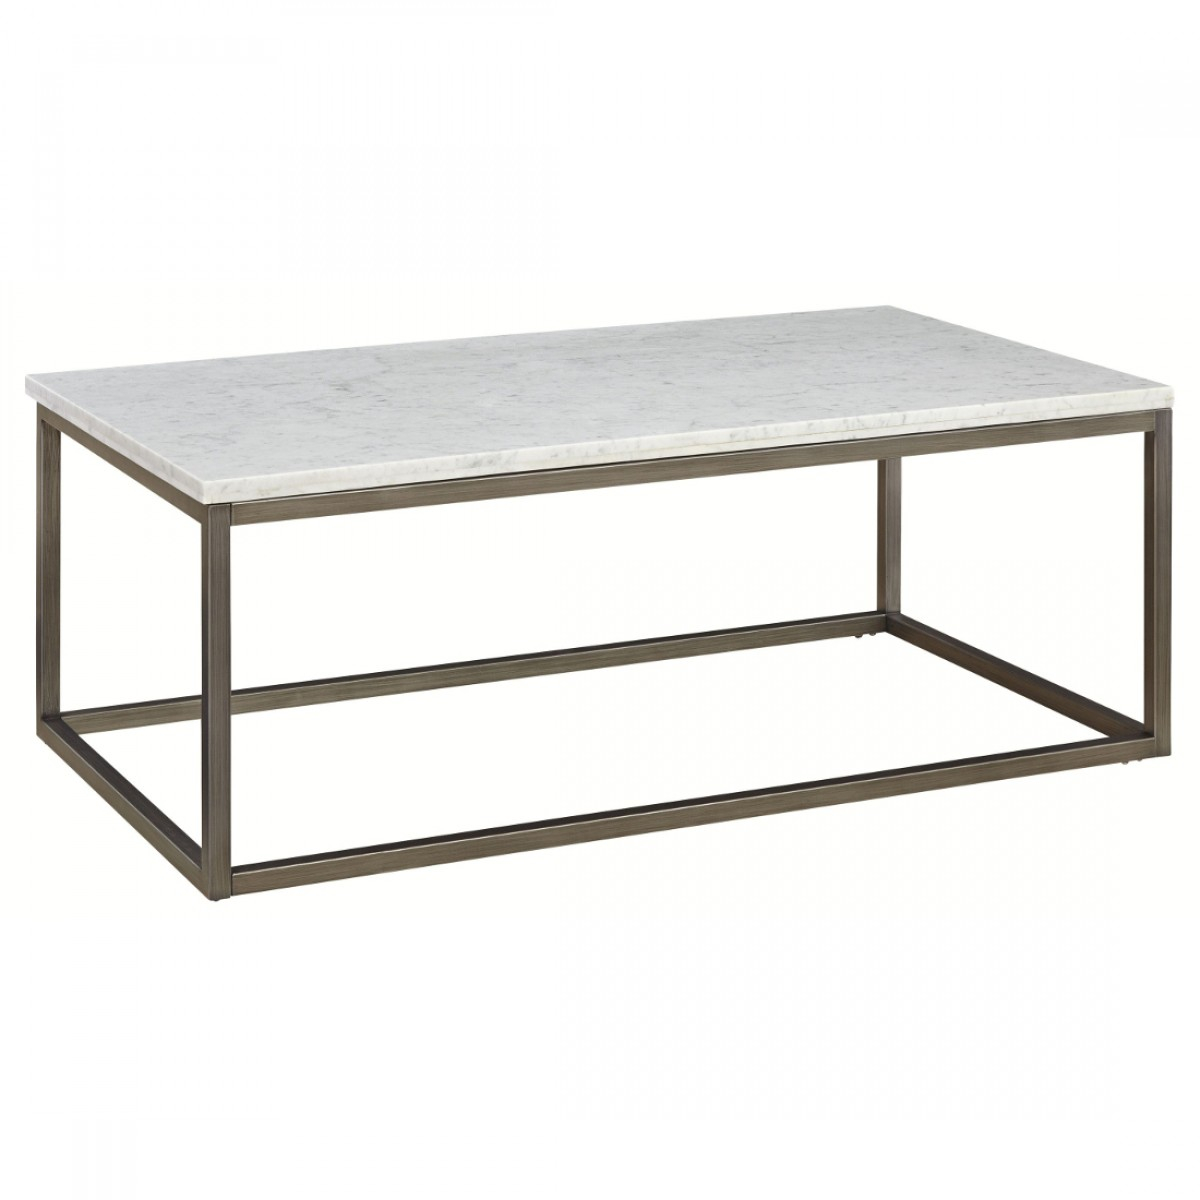 Casana Alana Rectangle Coffee Table With White Marble Top in sizing 1200 X 1200